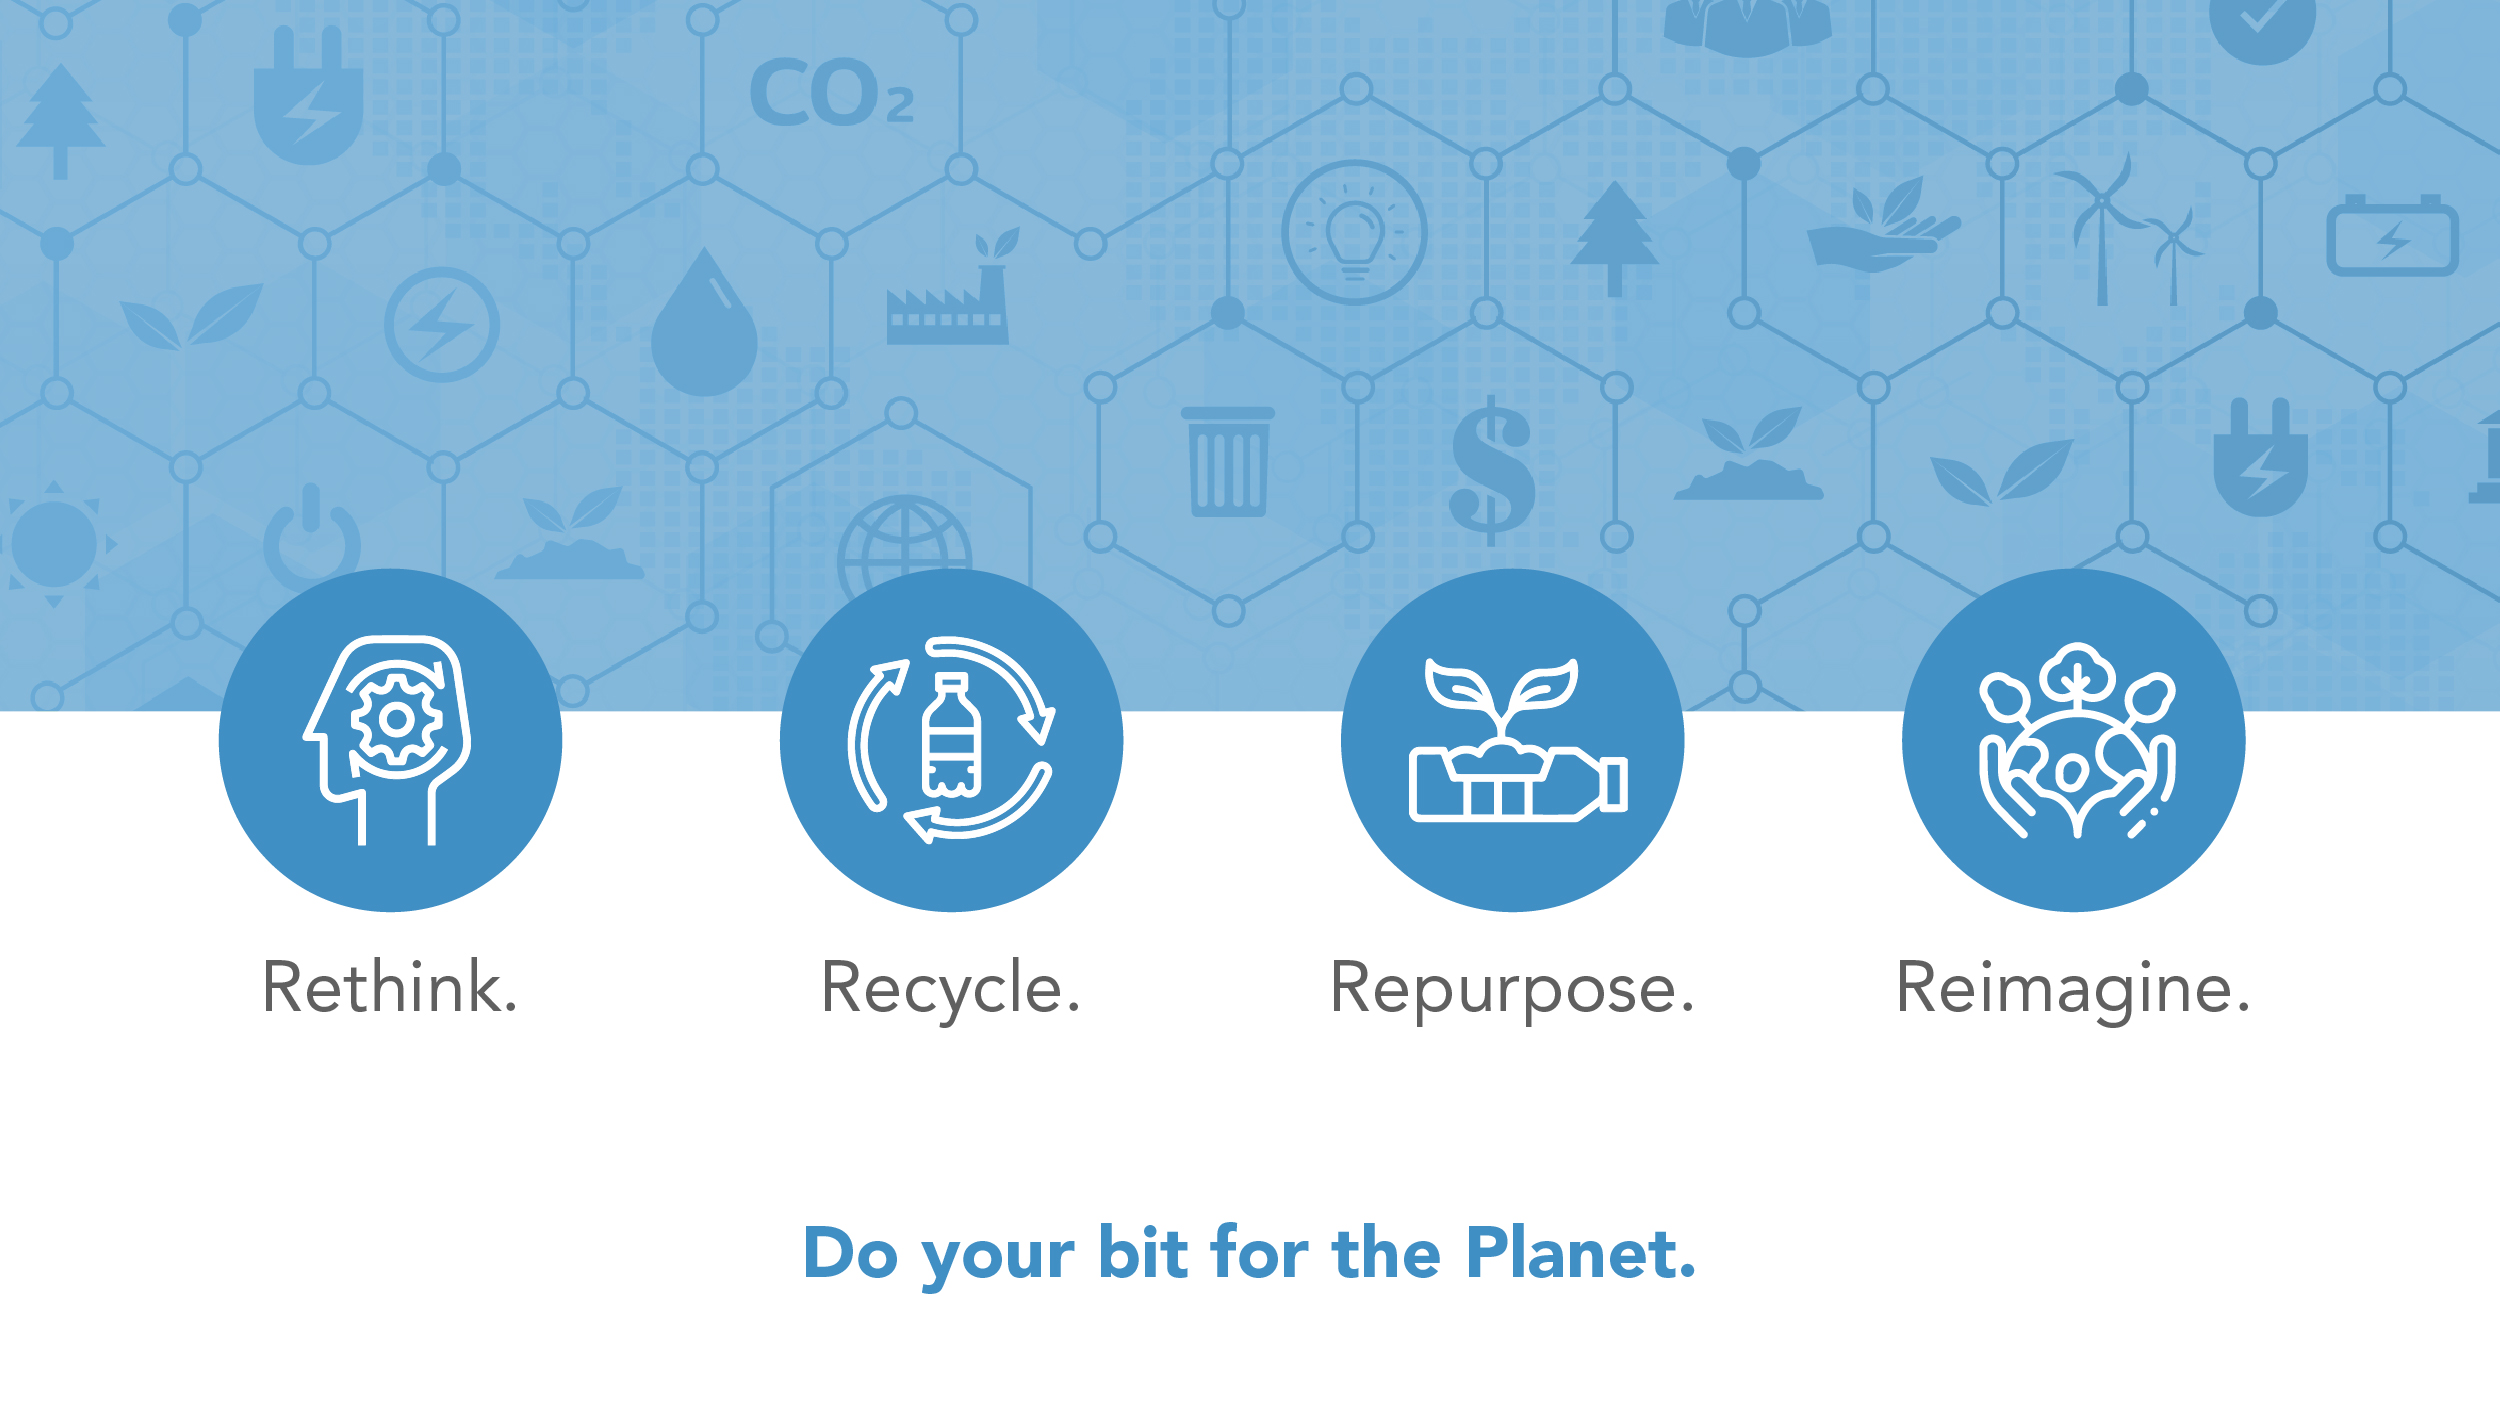 Do your bit for the planet rethink, recycle, repurpose